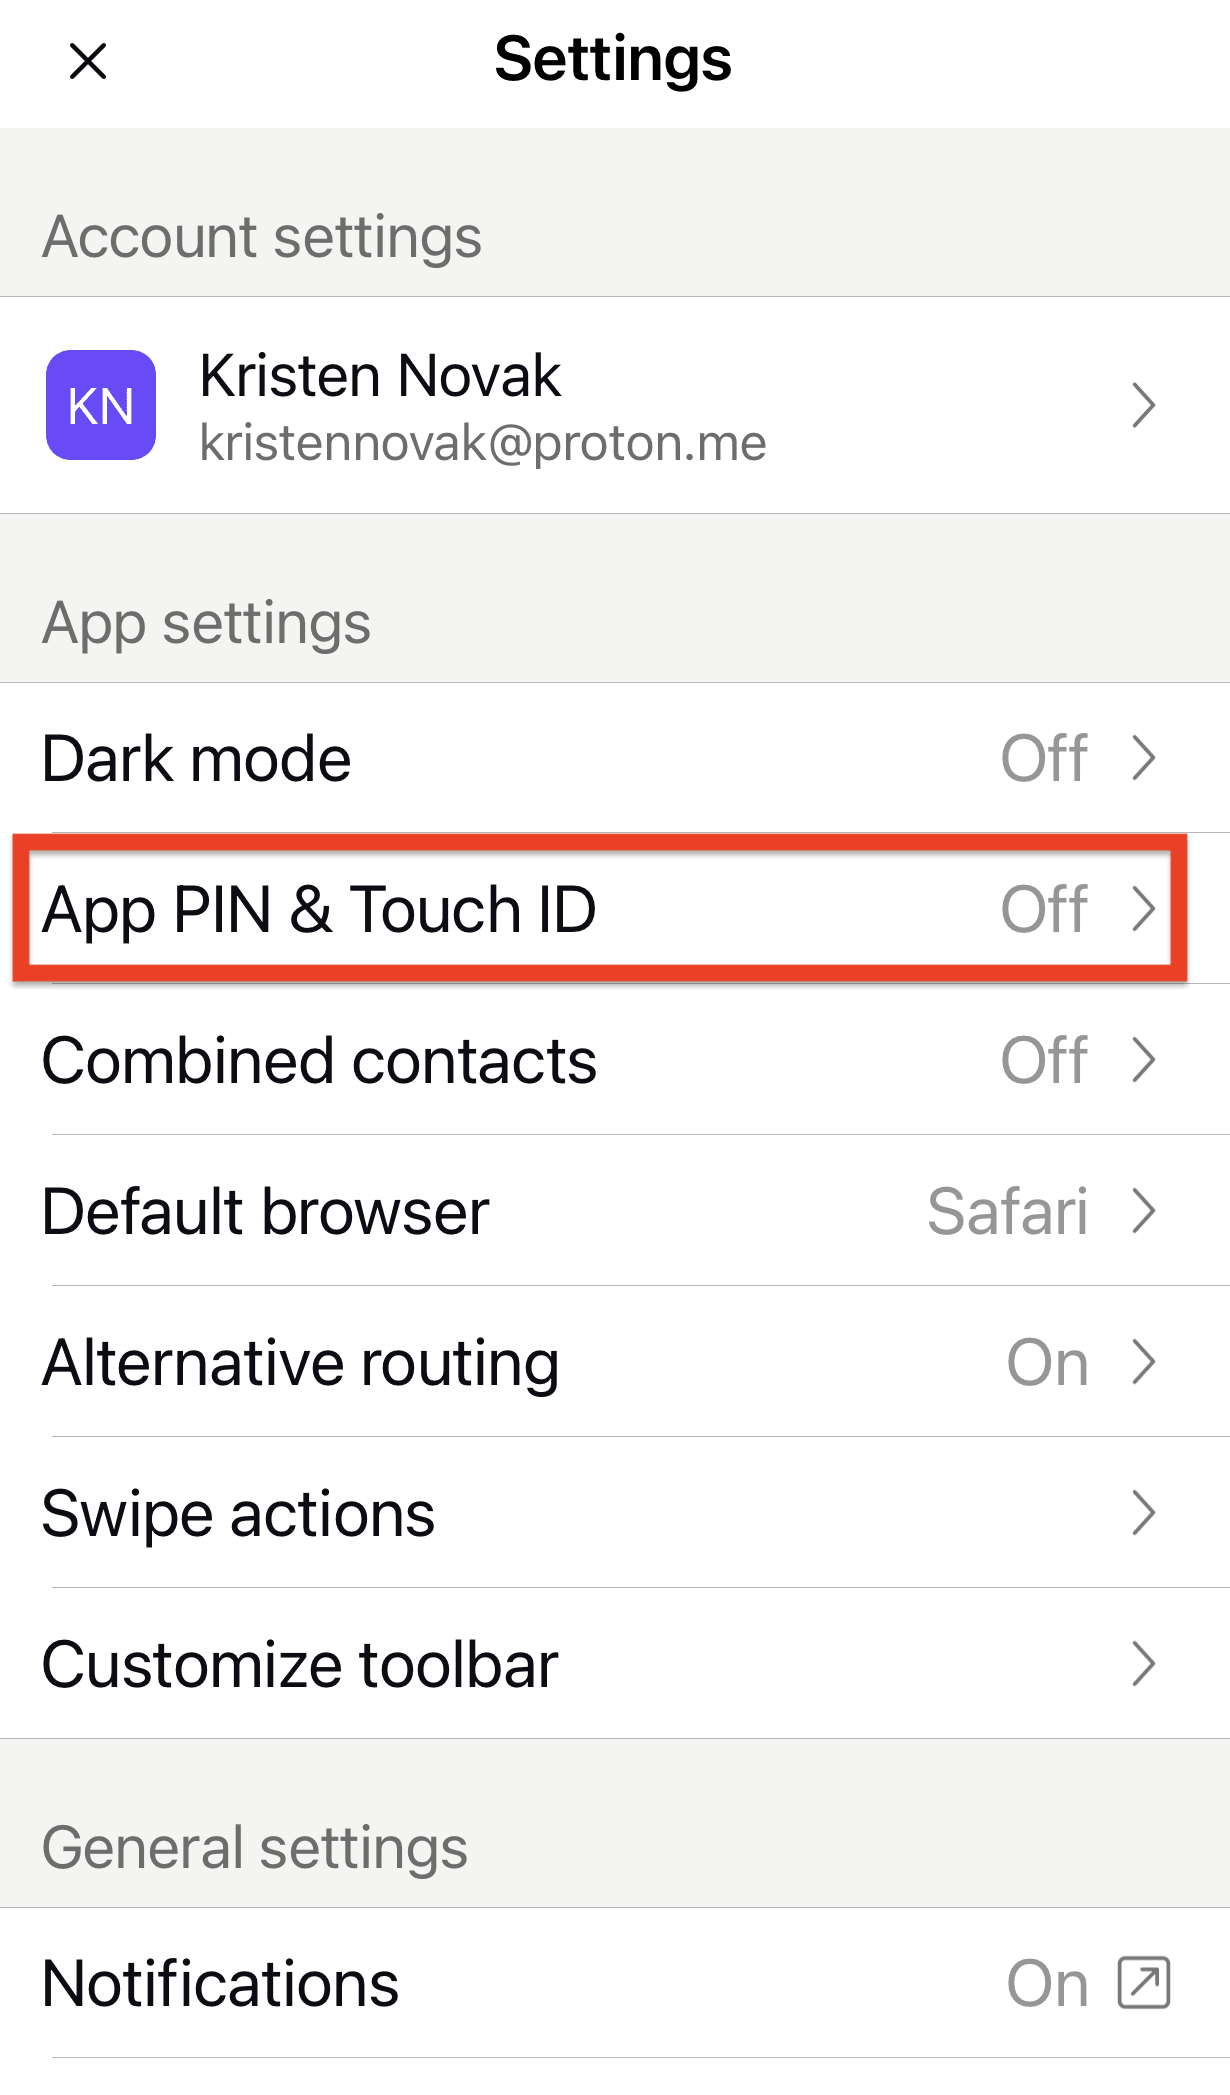 App PIN and Touch ID option